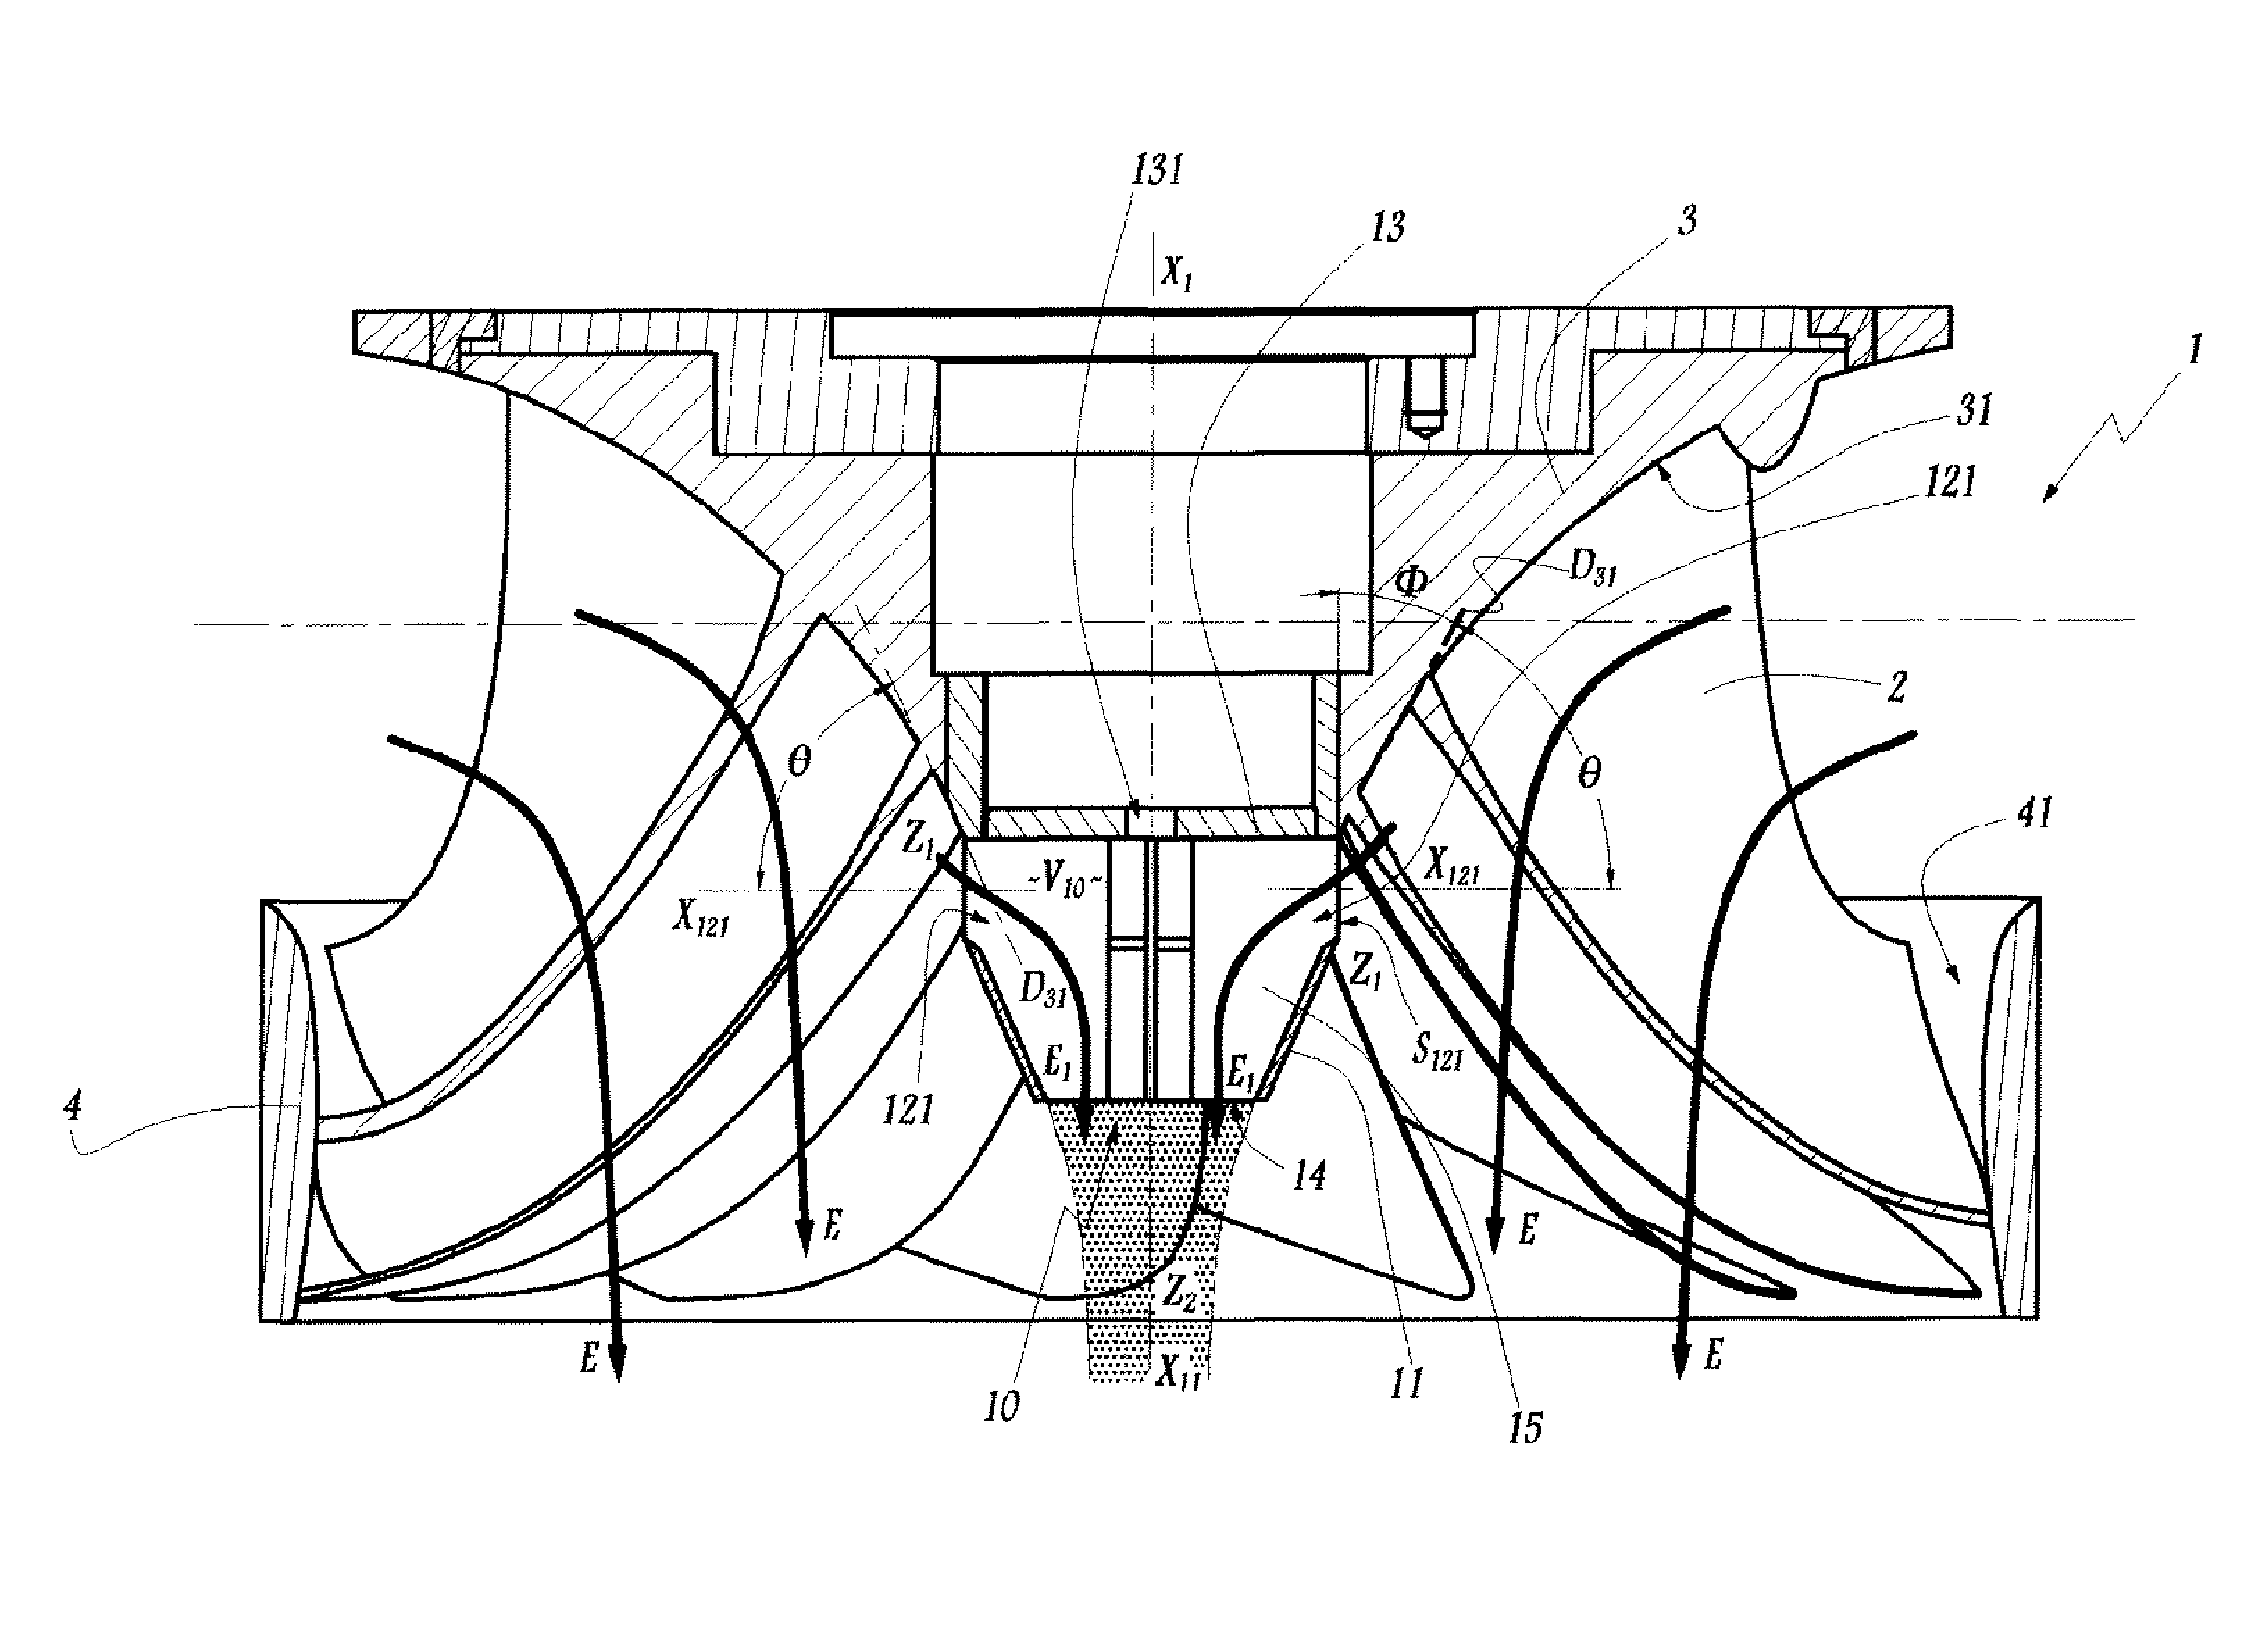 Francis-type hydraulic turbine wheel equipped with a tip-forming member, and method of reducing fluctuations using such a wheel